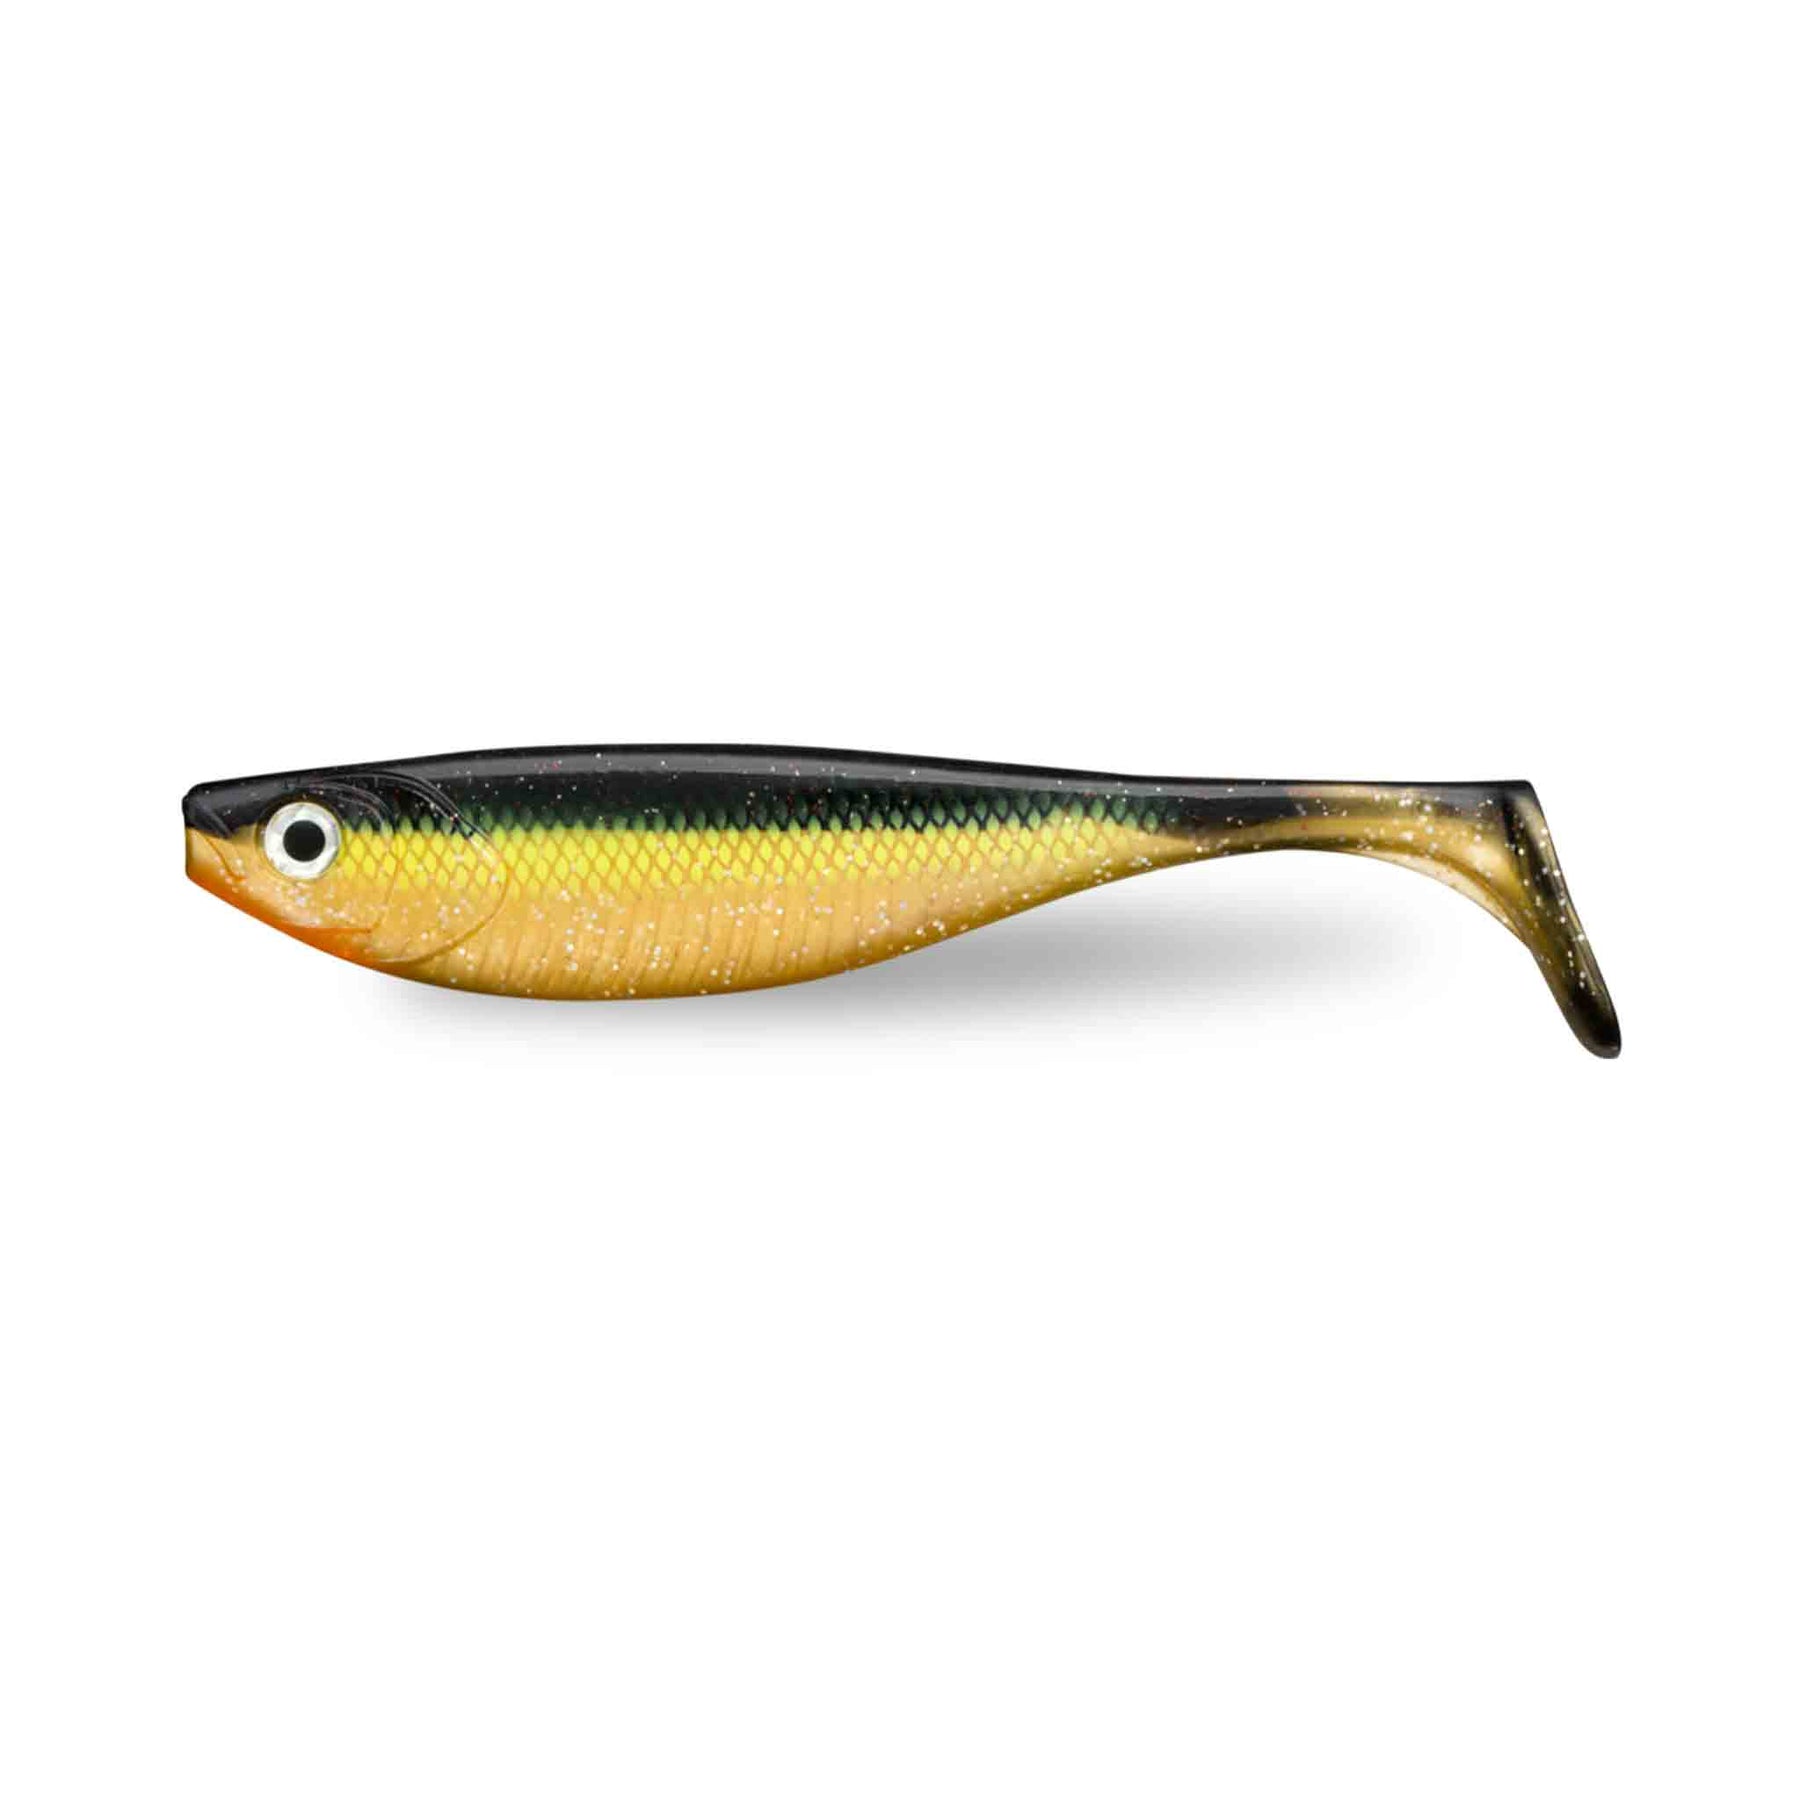 View of Swimbaits Storm Boom Shad 9" Swimbait Gold available at EZOKO Pike and Musky Shop